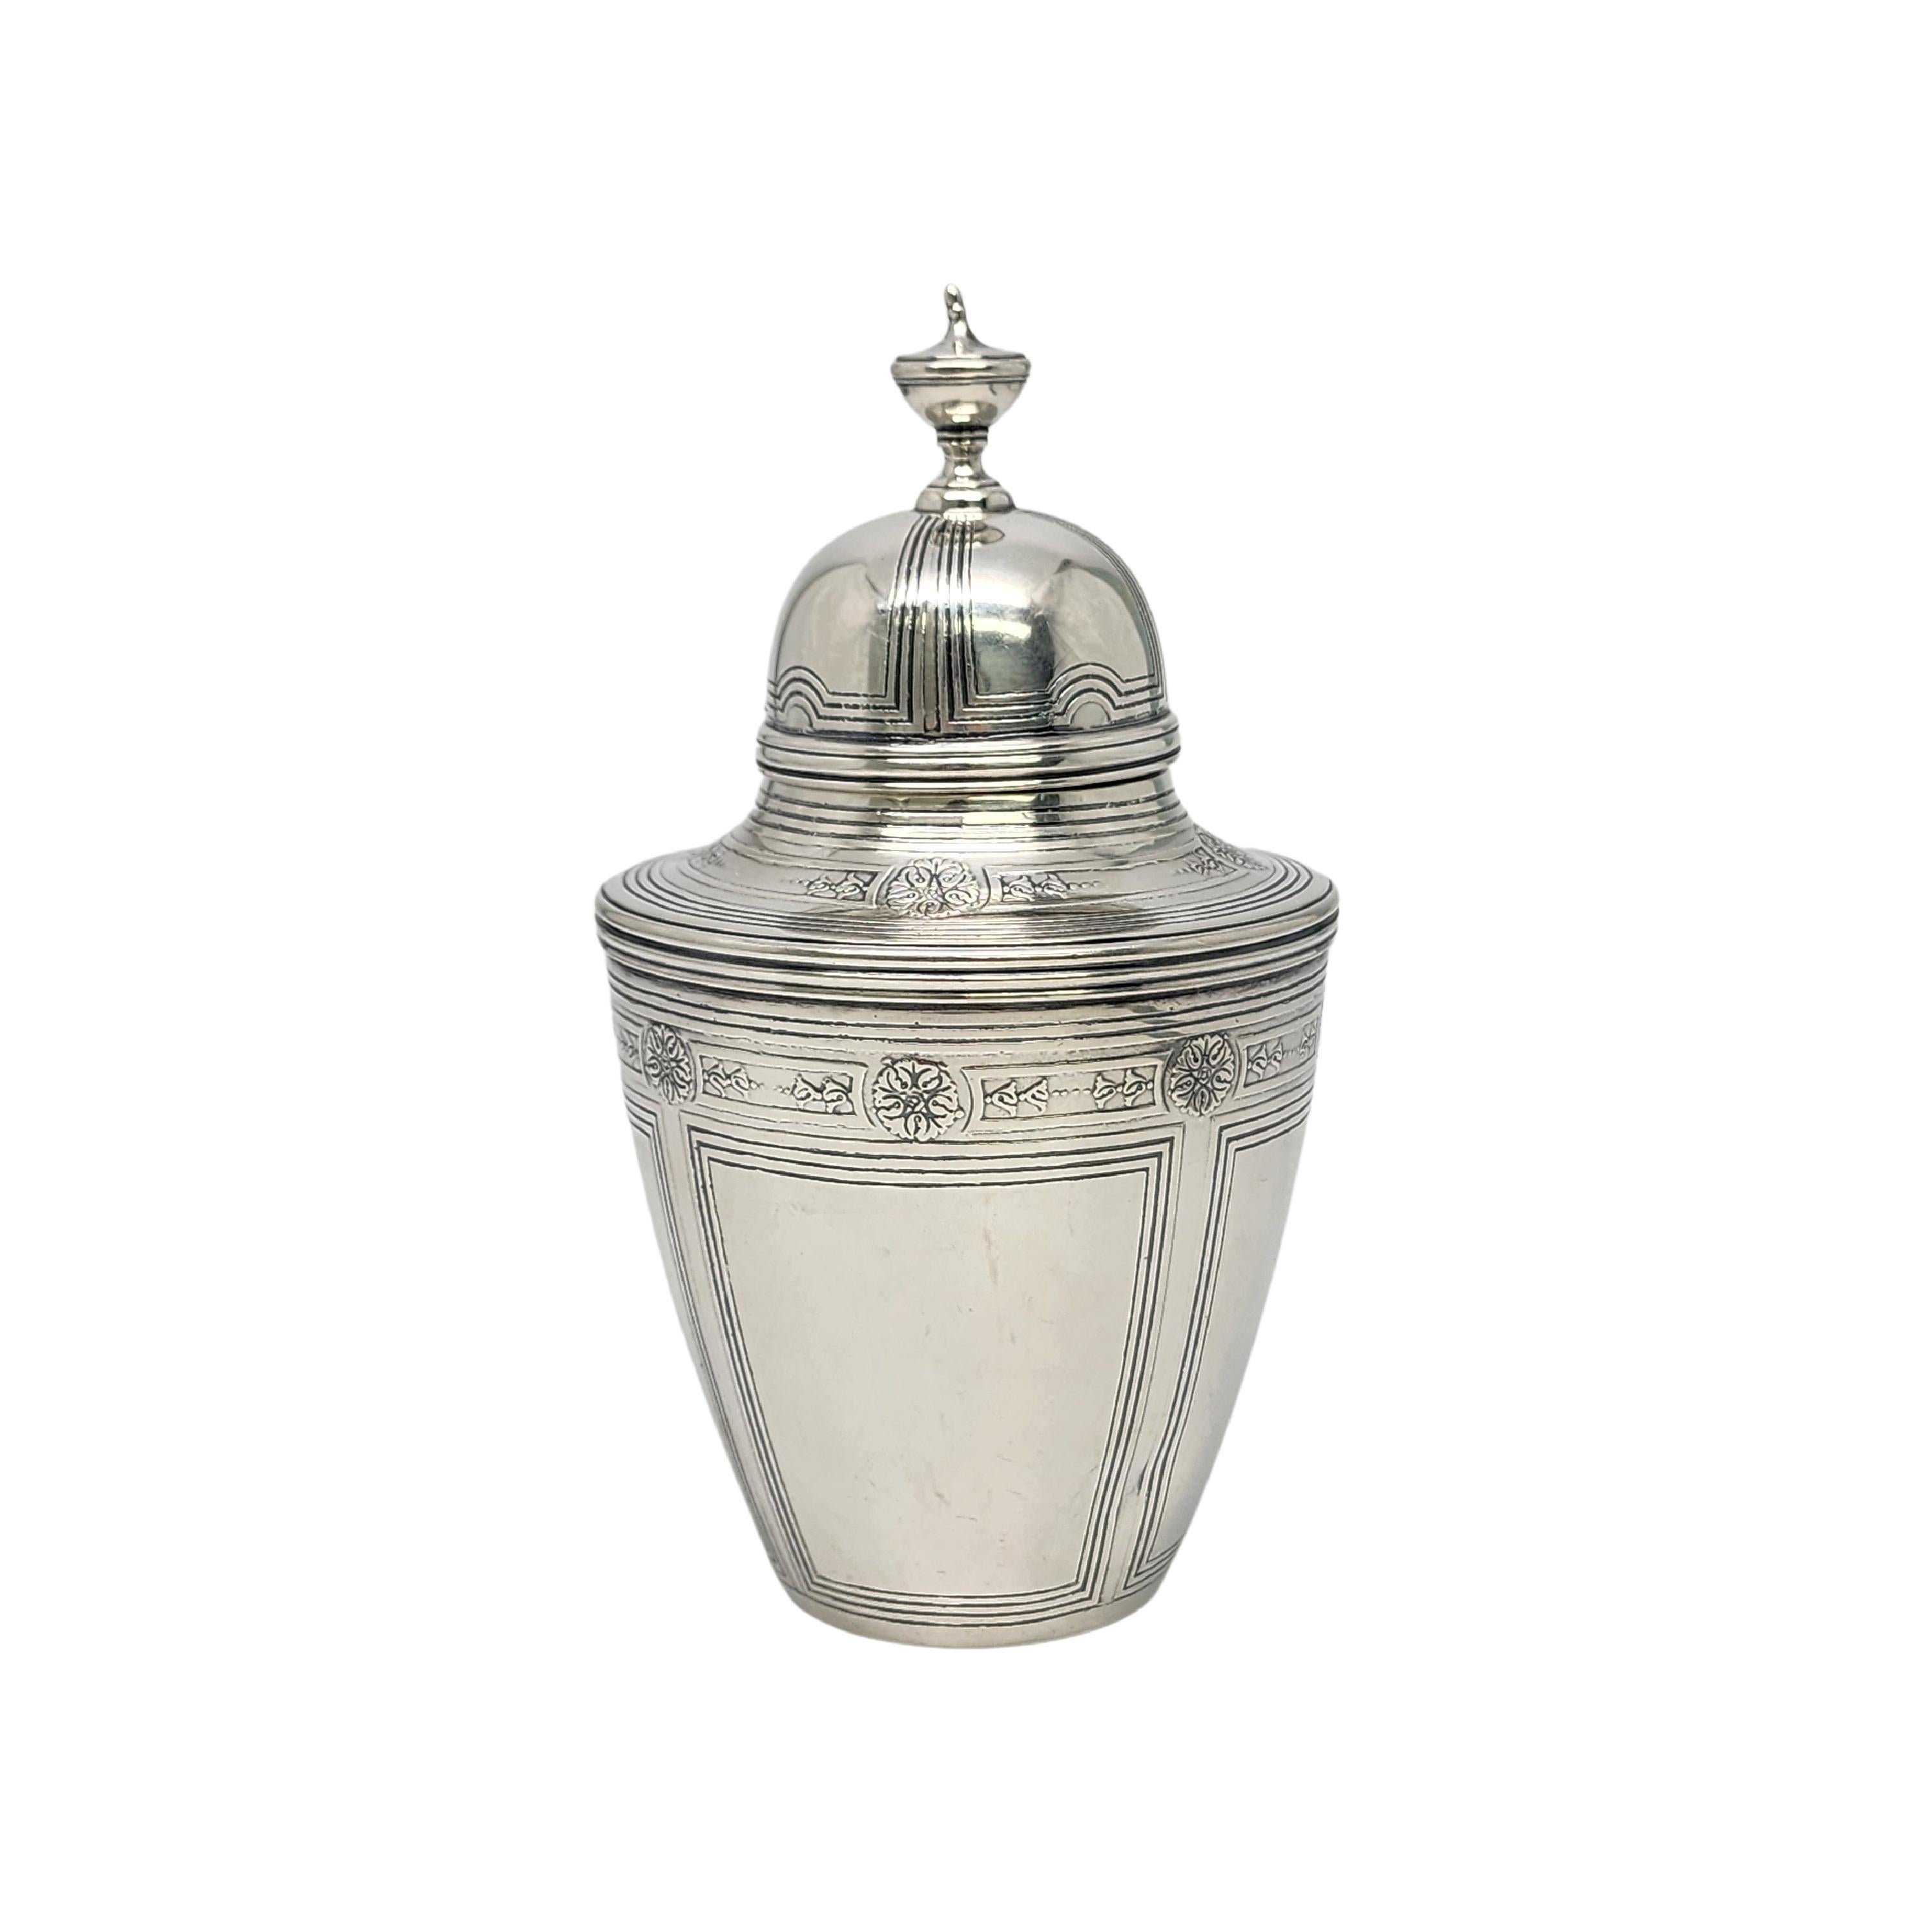 Sterling silver tea caddy by Tiffany & Co with monogram.

Monogram appears to be MSC

This beautiful urn style tea caddy is done in an Art Deco pattern featuring flowers and lines. Pattern number dates this piece to circa 1910.  Hallmarks date this